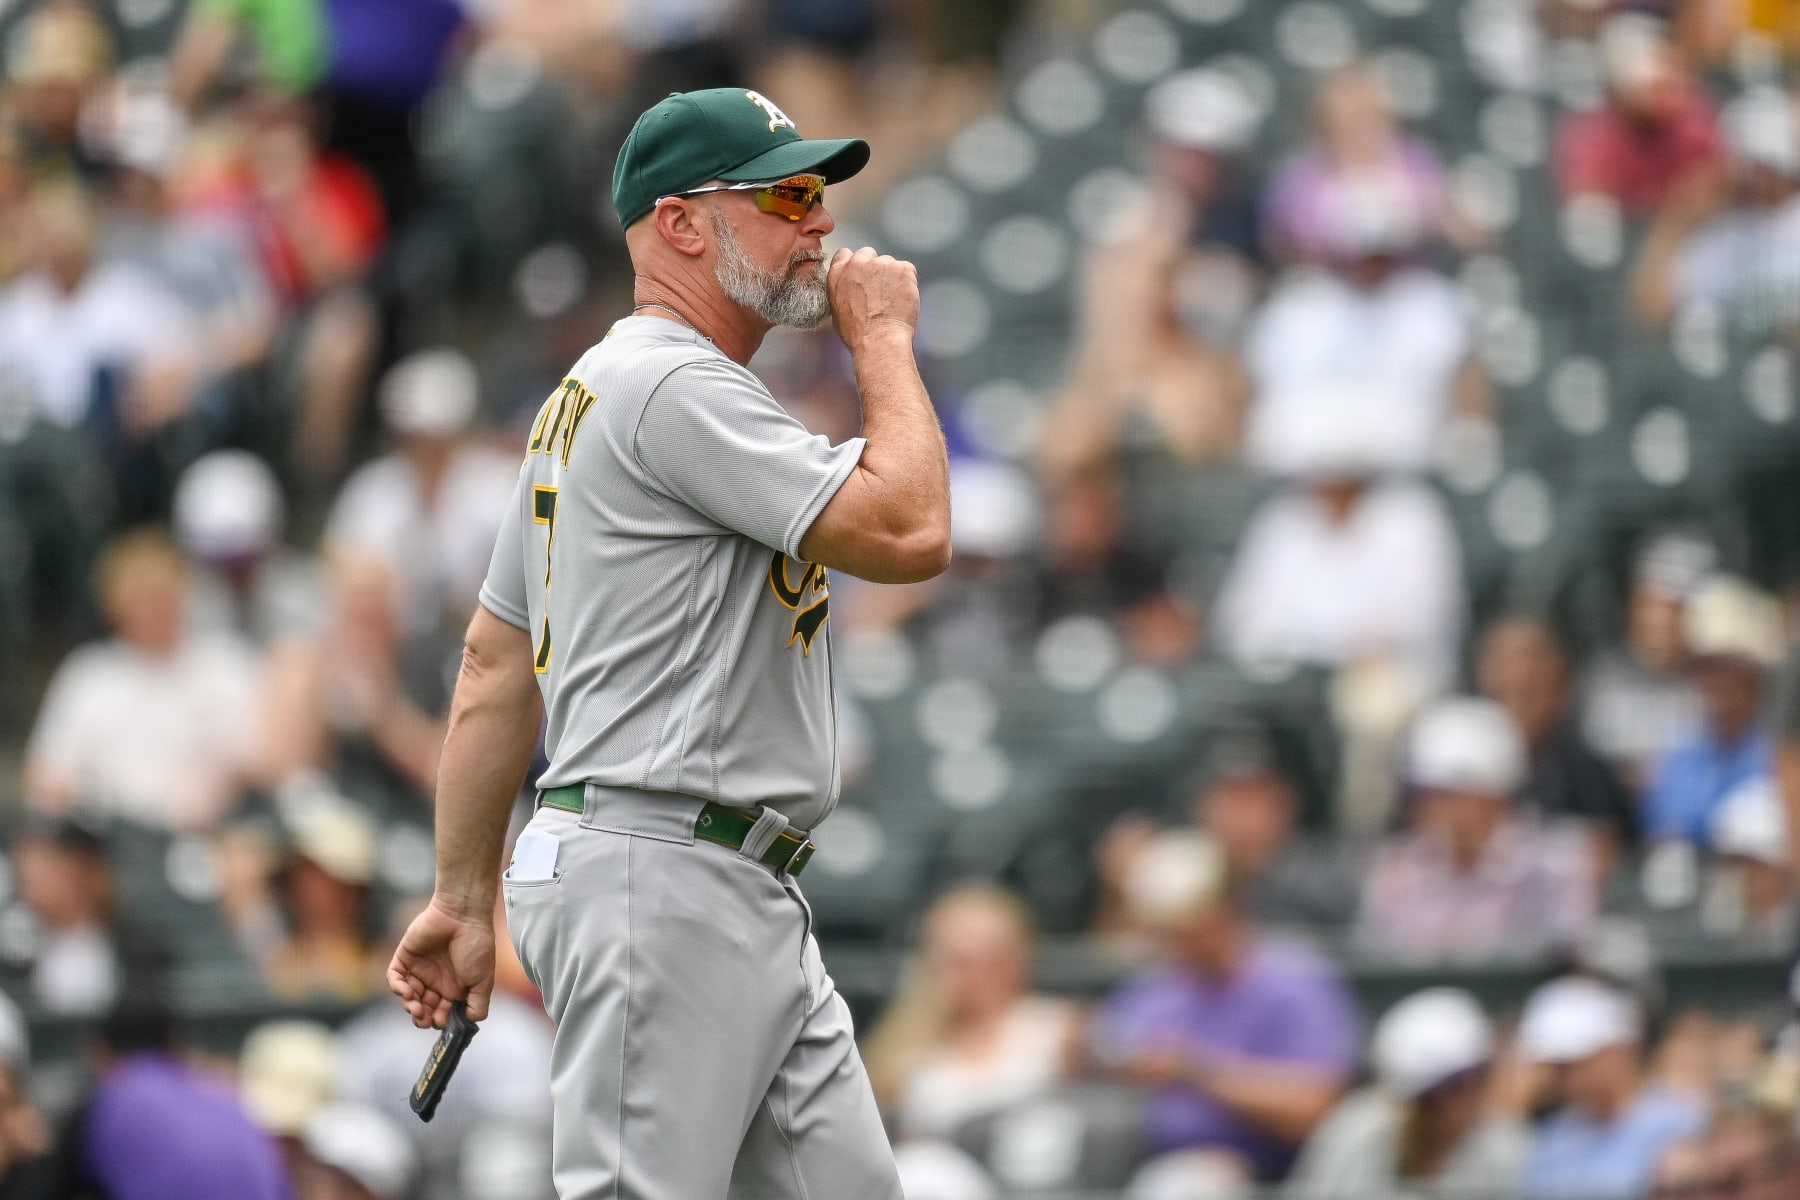 Oakland A's prospect watch: Sonny Gray trade package has risk but